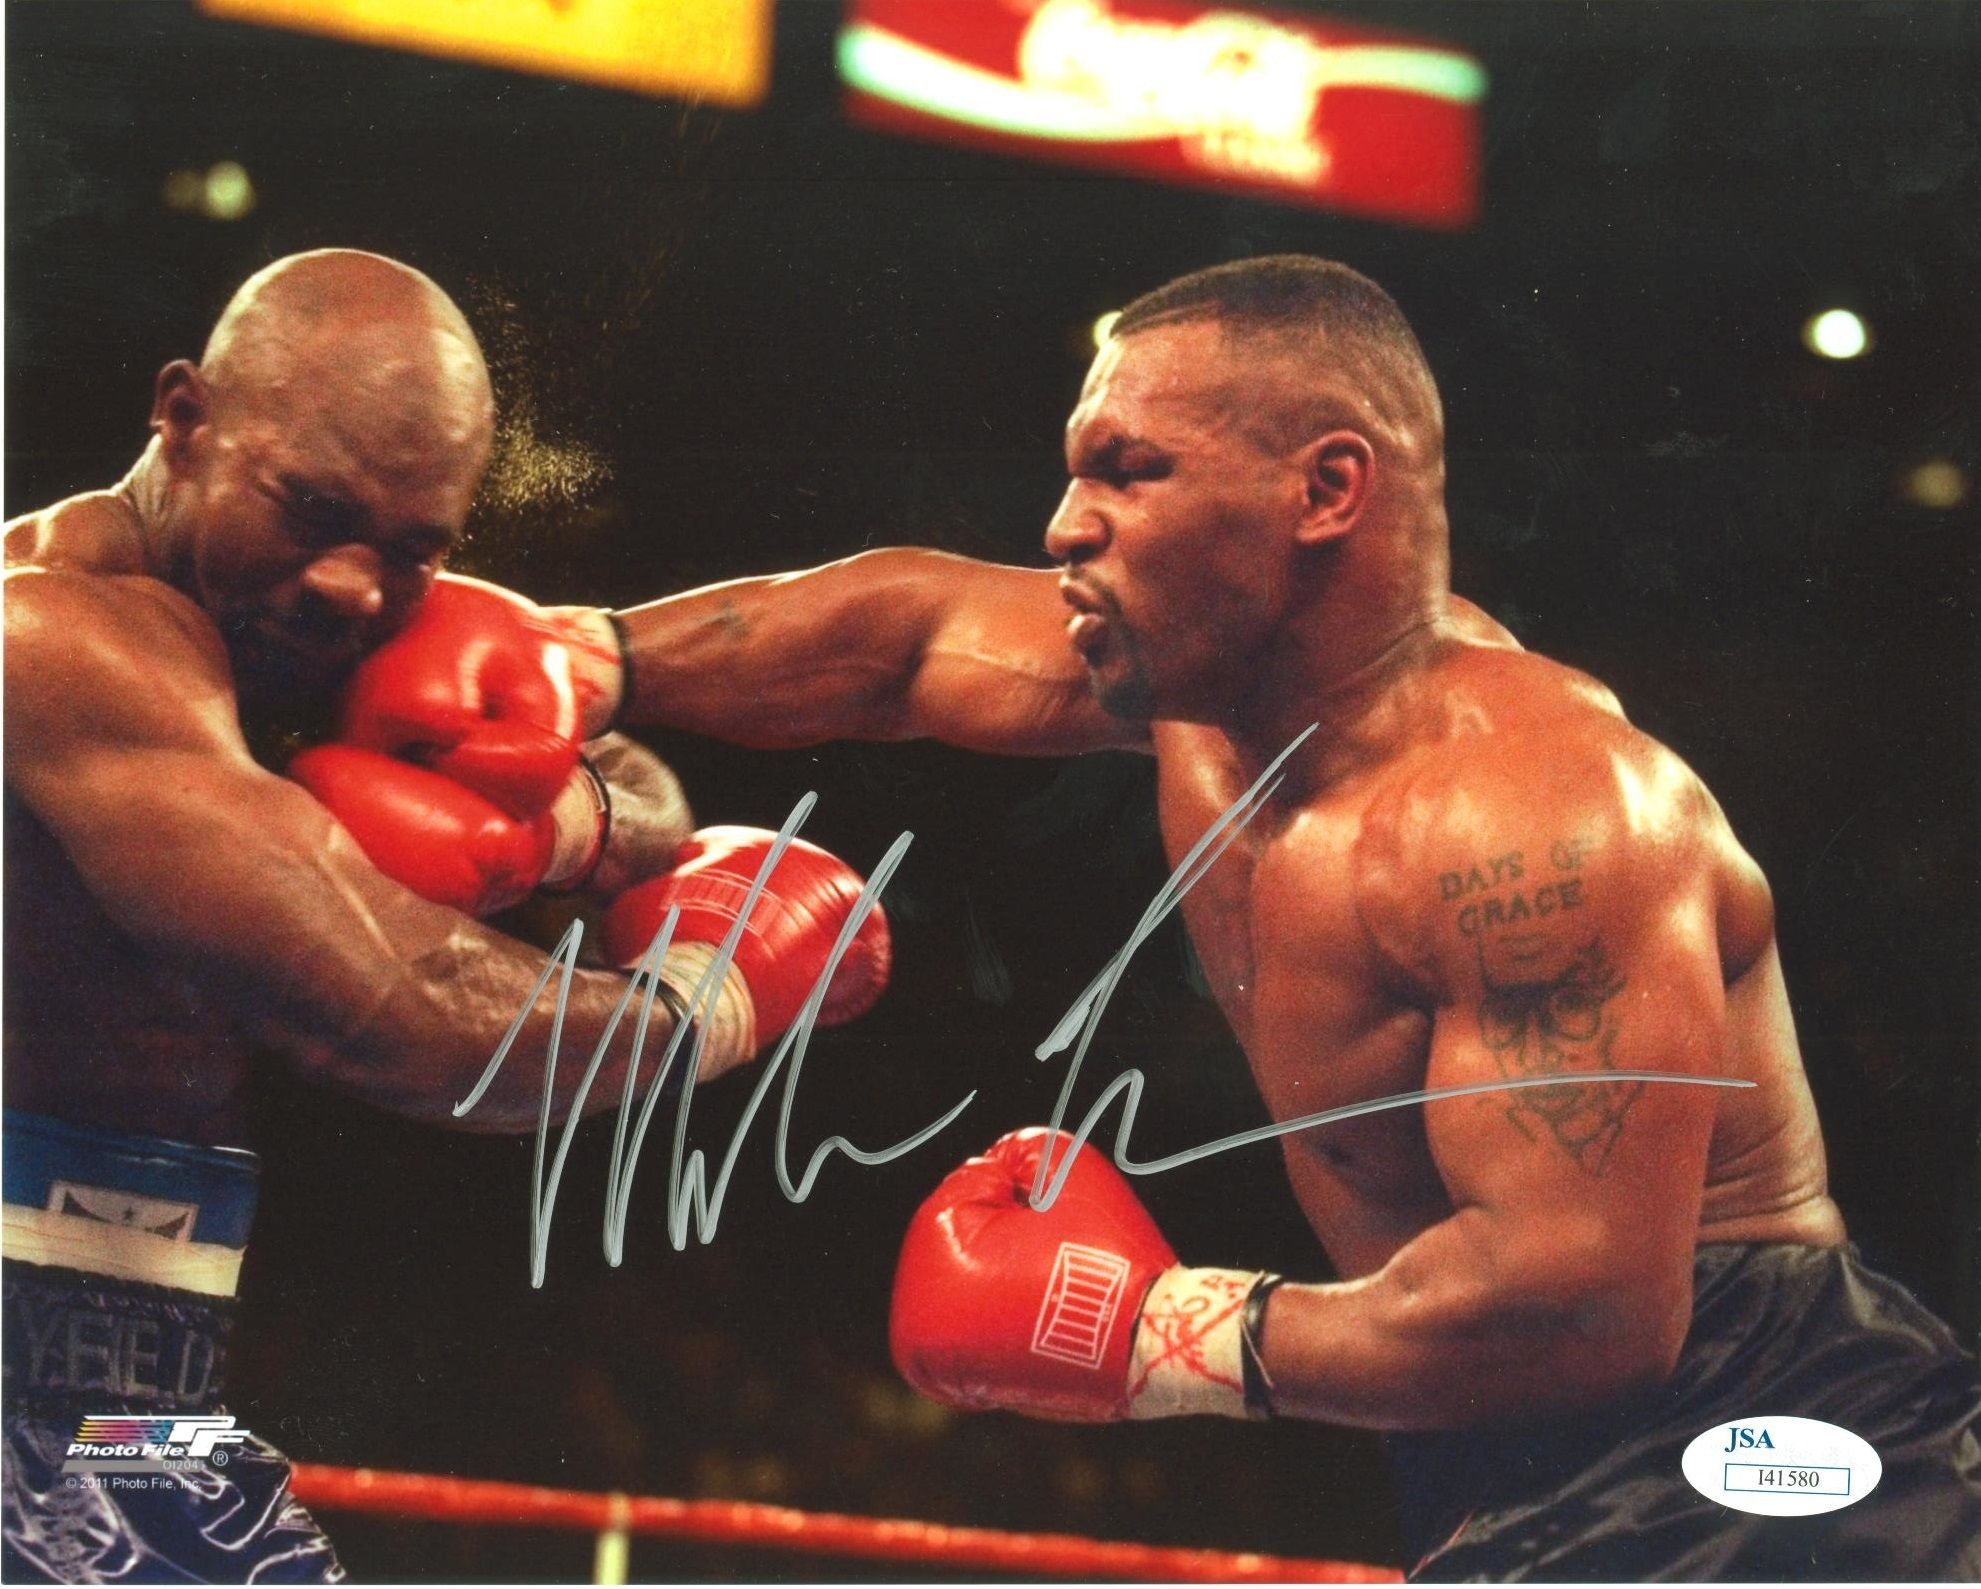 V.815: Mike Tyson Wallpaper, HD Image of Mike Tyson